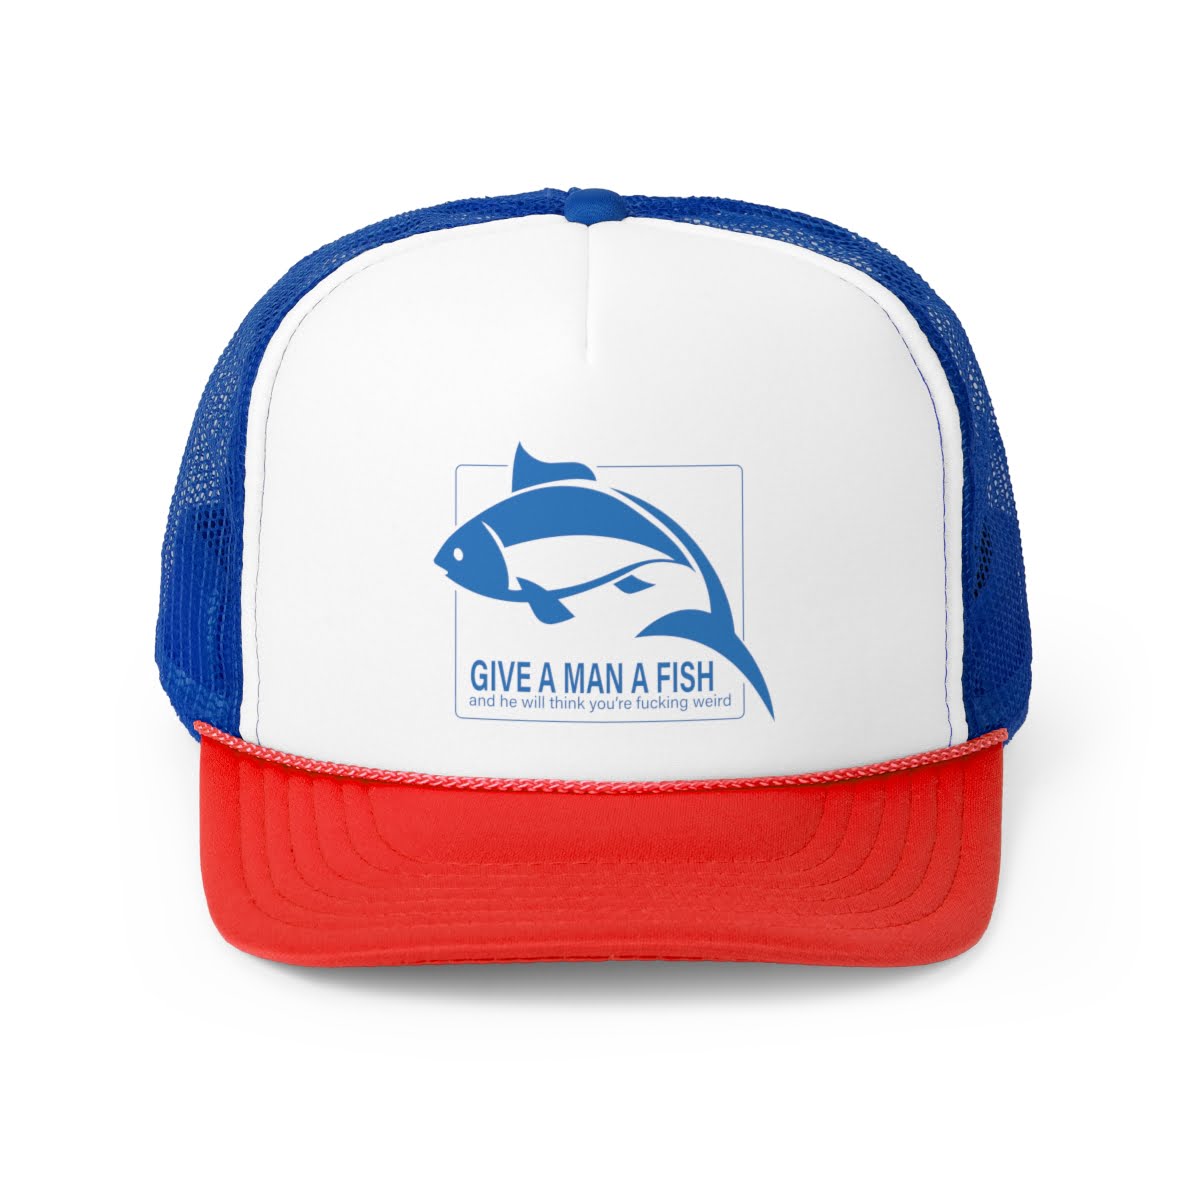 Trucker Caps - Give A Man A Fish - GYST Services